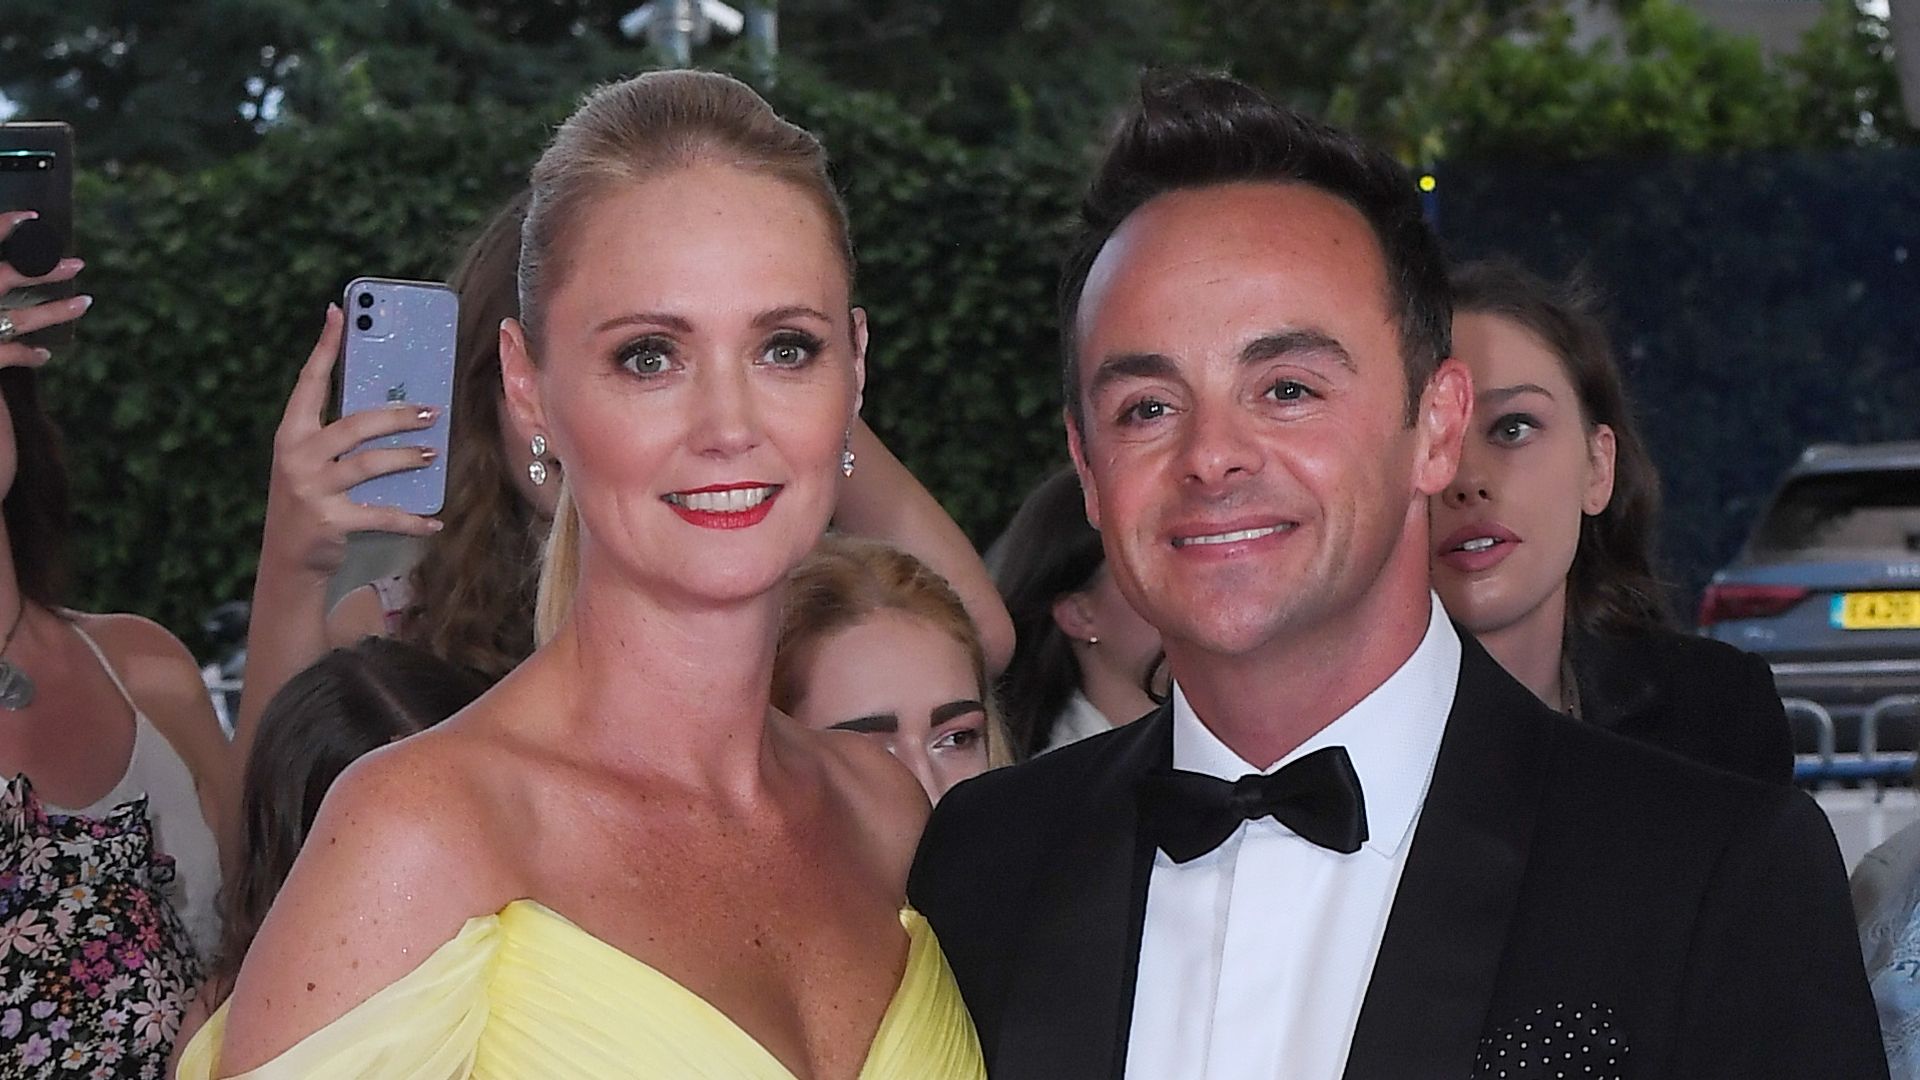 Ant McPartlin and Anne-Marie Corbett make major family decision on future after welcoming son